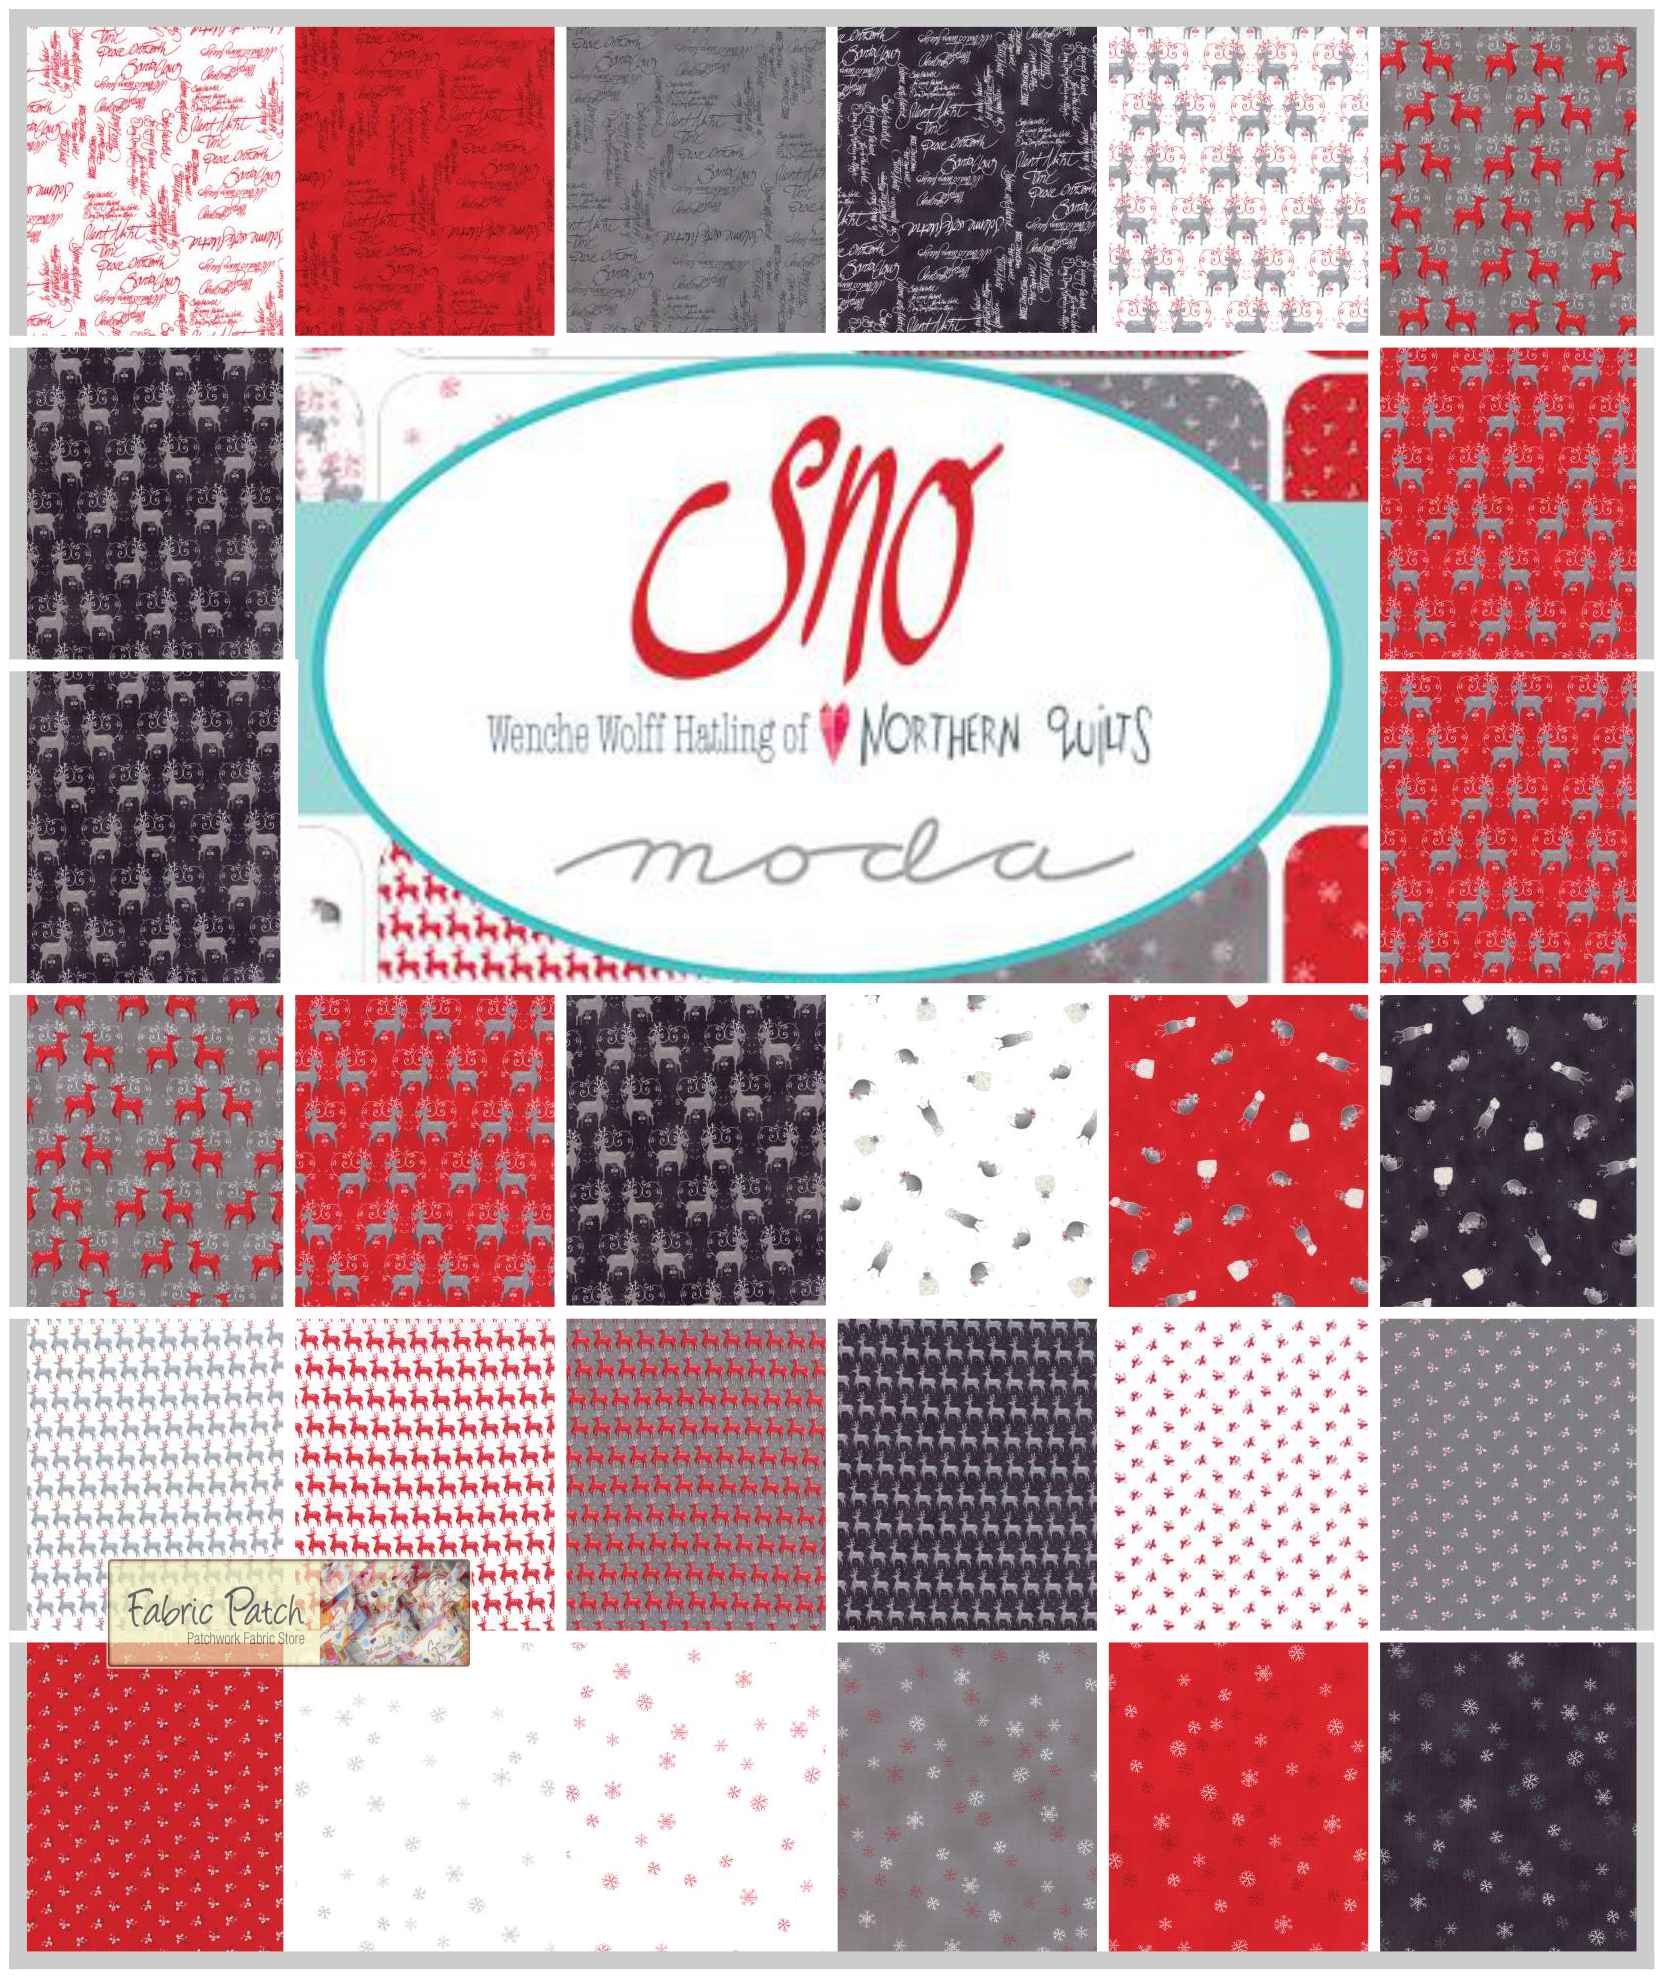 Sno Charm Square  Applique, patchwork and quilting fabrics by Zen Chic for Moda Fabrics. 